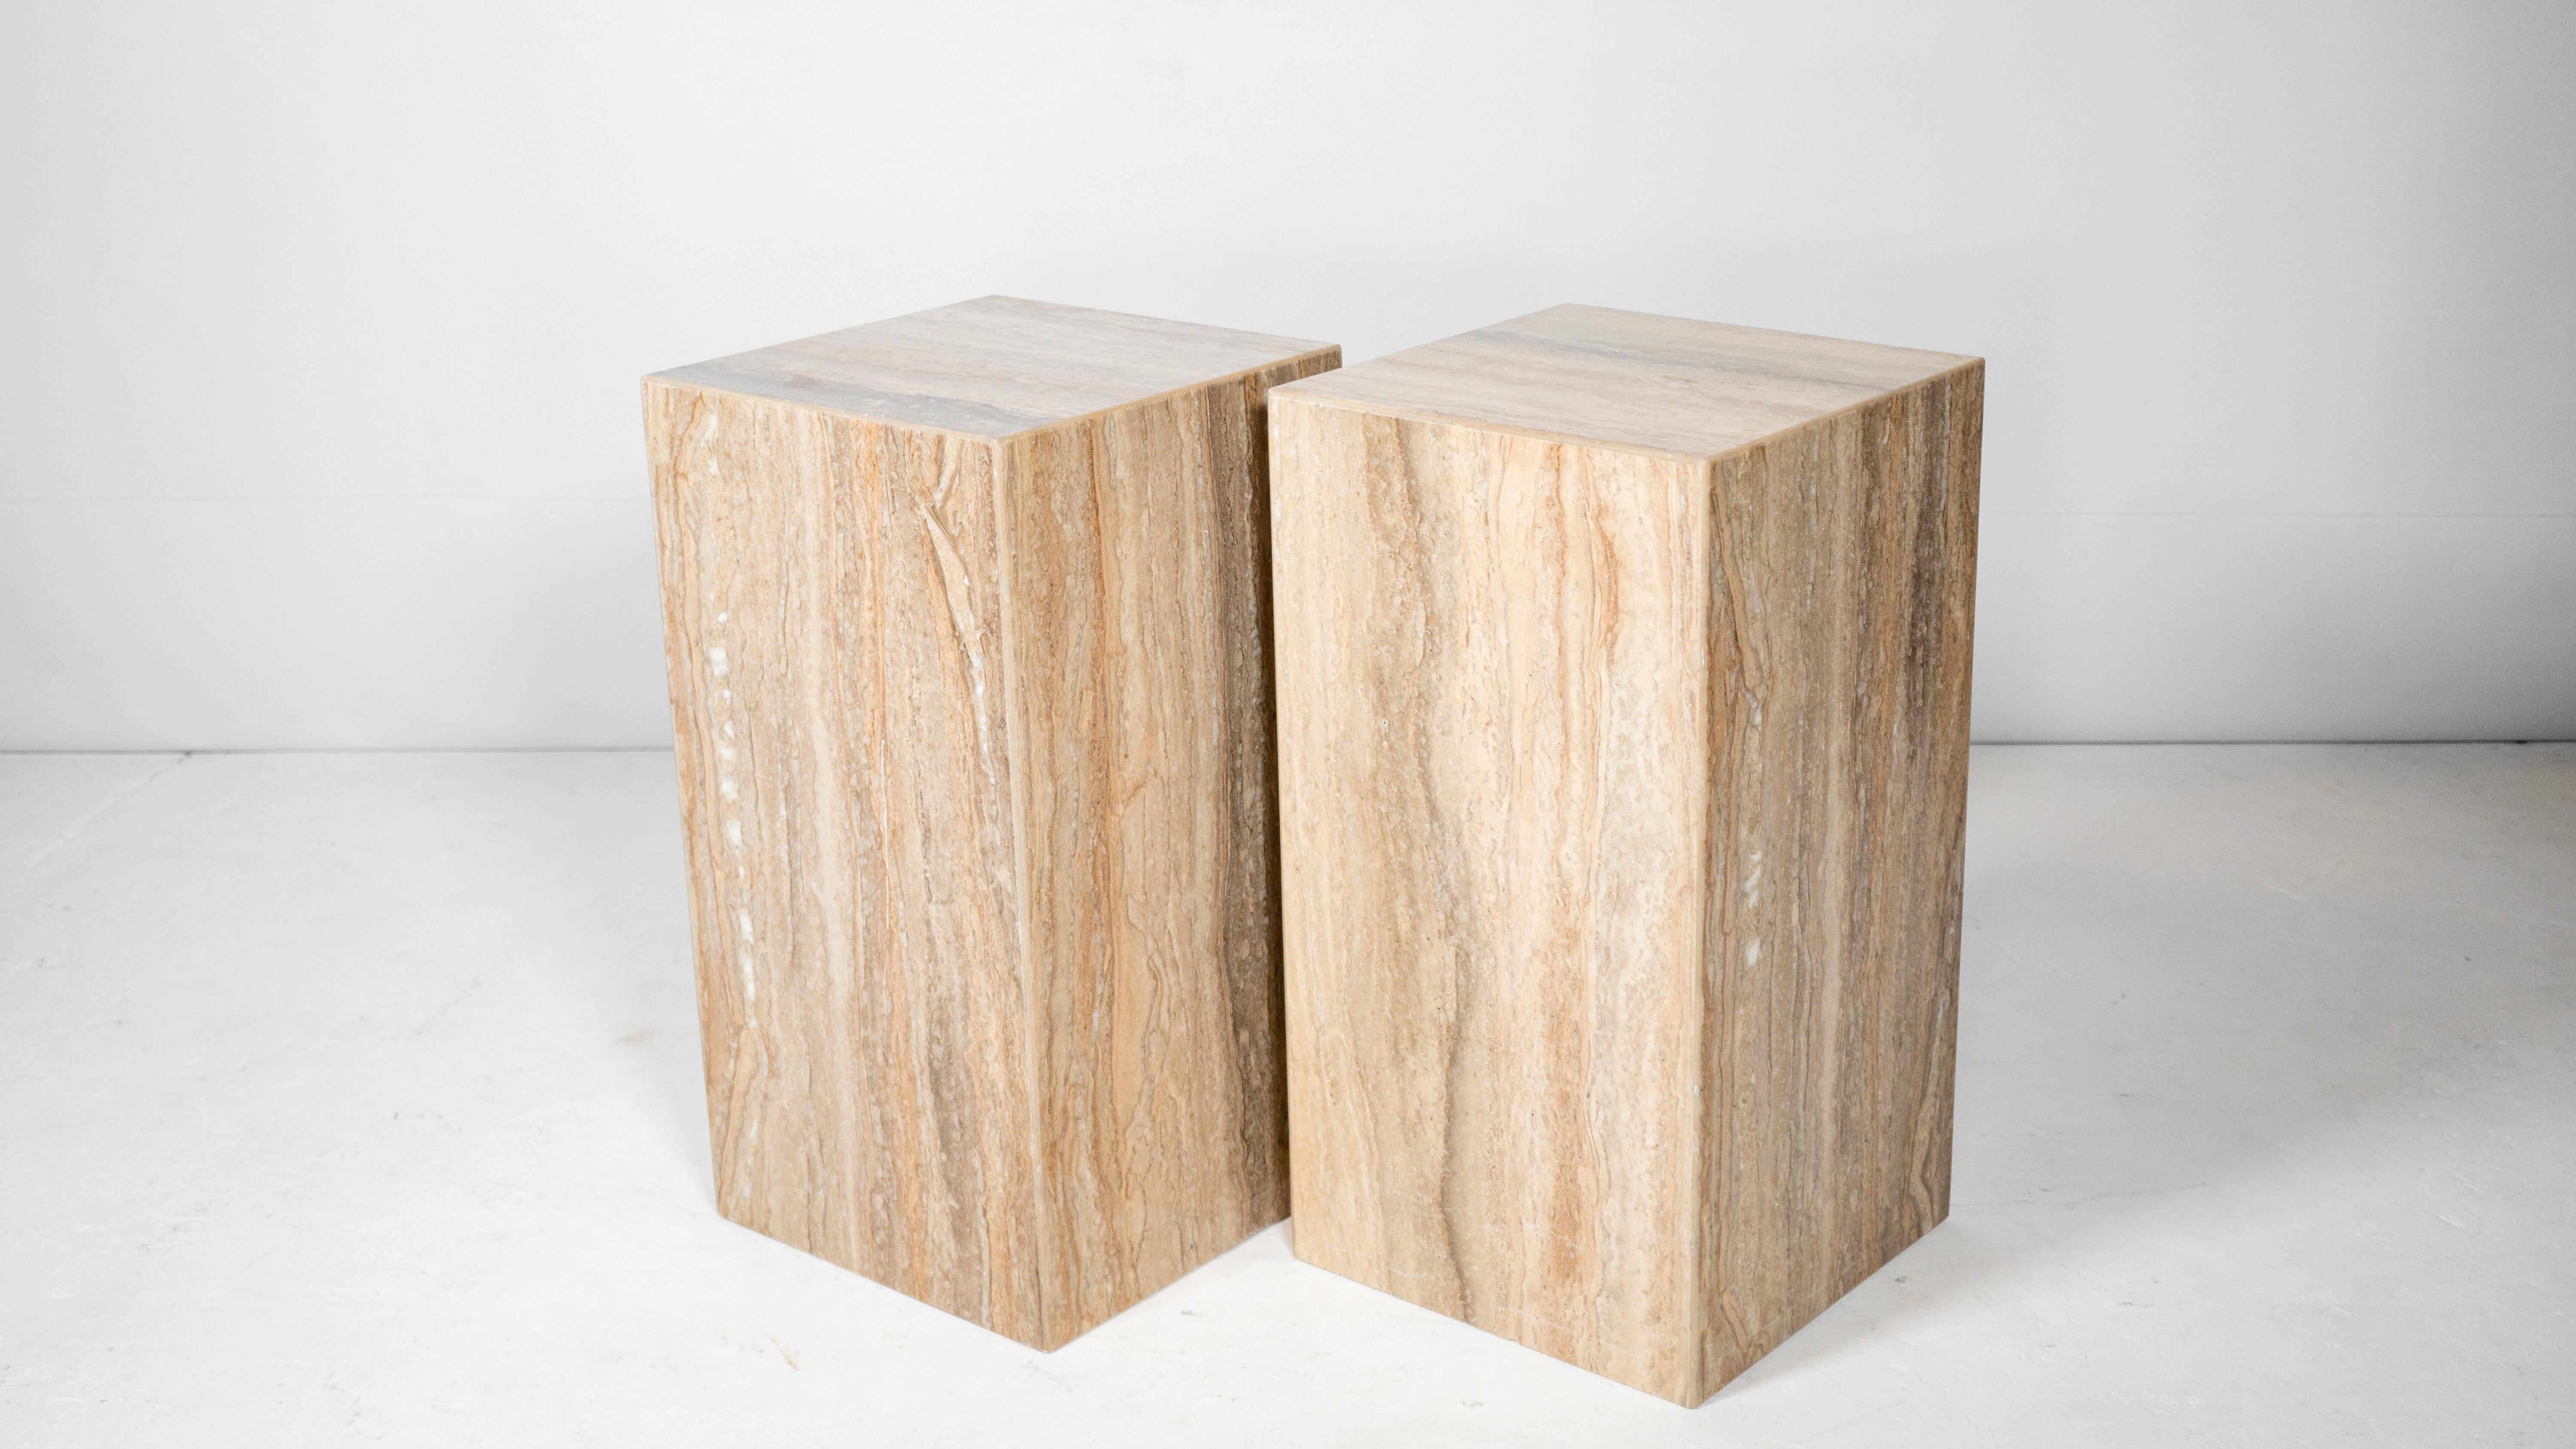 1980s Italian Polished Travertine Tower Cube Side Tables - a Pair For Sale 7